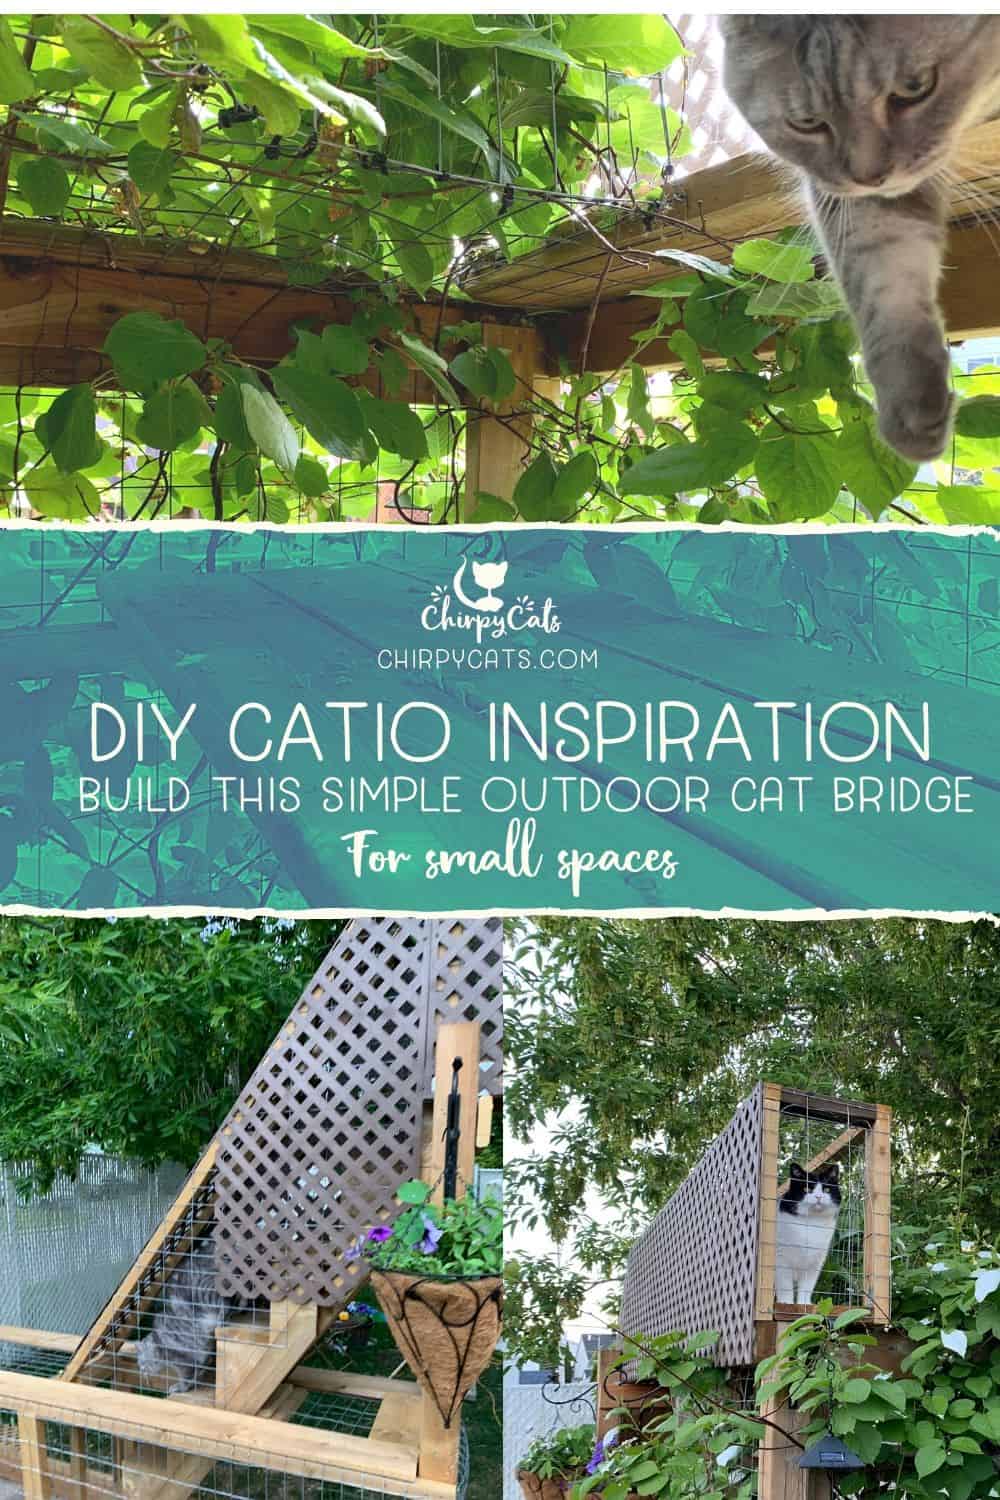 How to build this charming cat bridge that will spruce up your catio